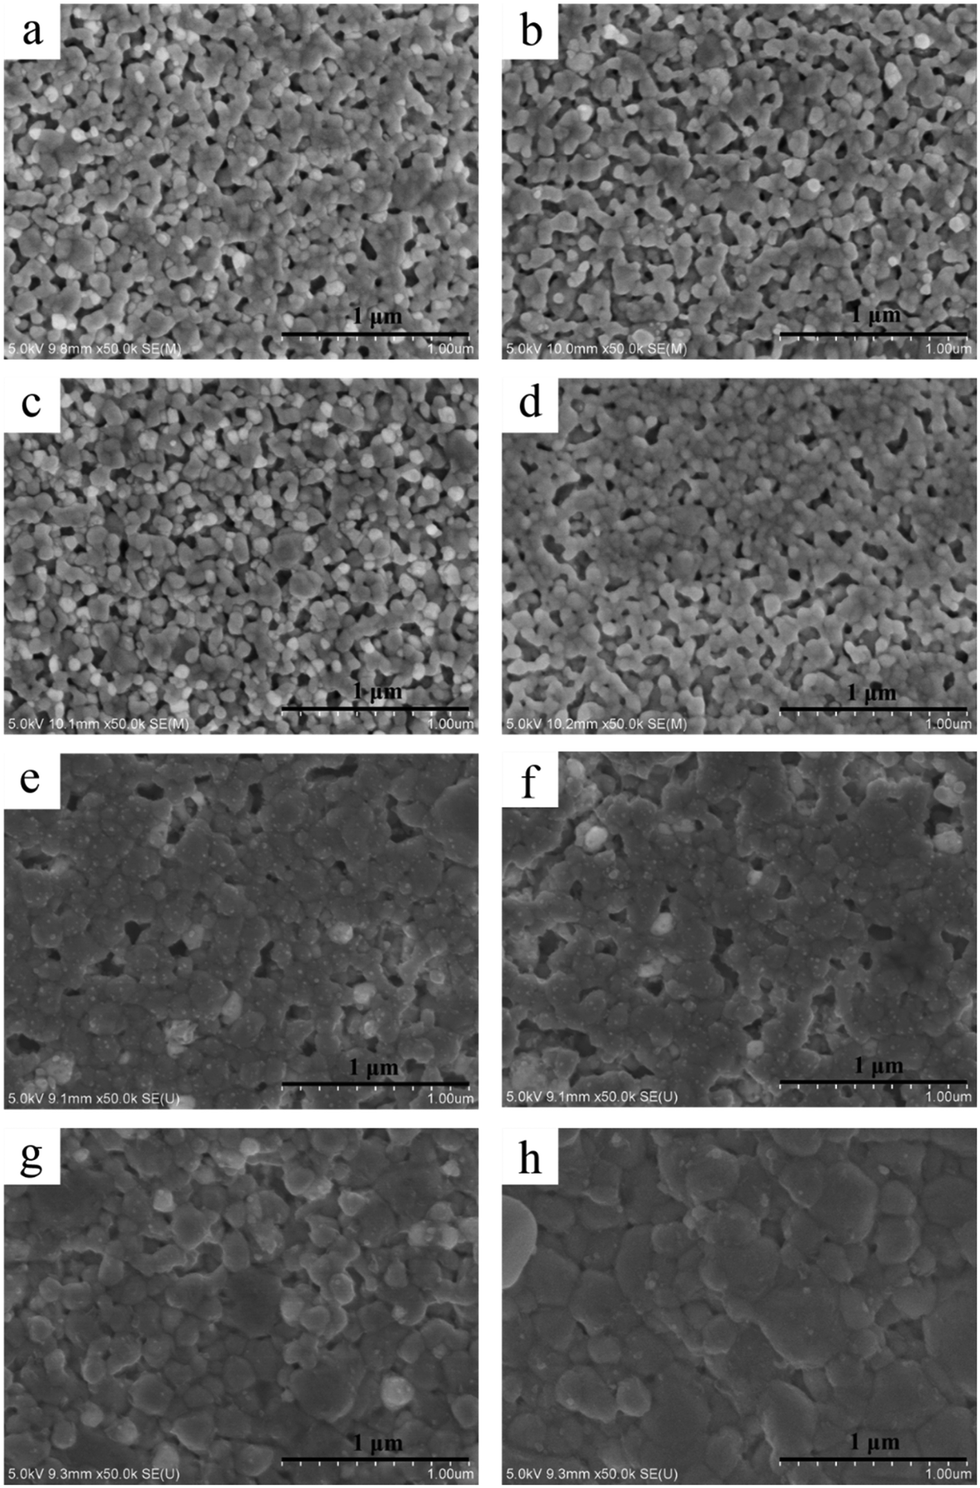 Preparation Of Silver Nanoparticles With Hyperbranched Polymers As A Stabilizer For Inkjet Printing Of Flexible Circuits New Journal Of Chemistry Rsc Publishing Doi 10 1039 C8njk